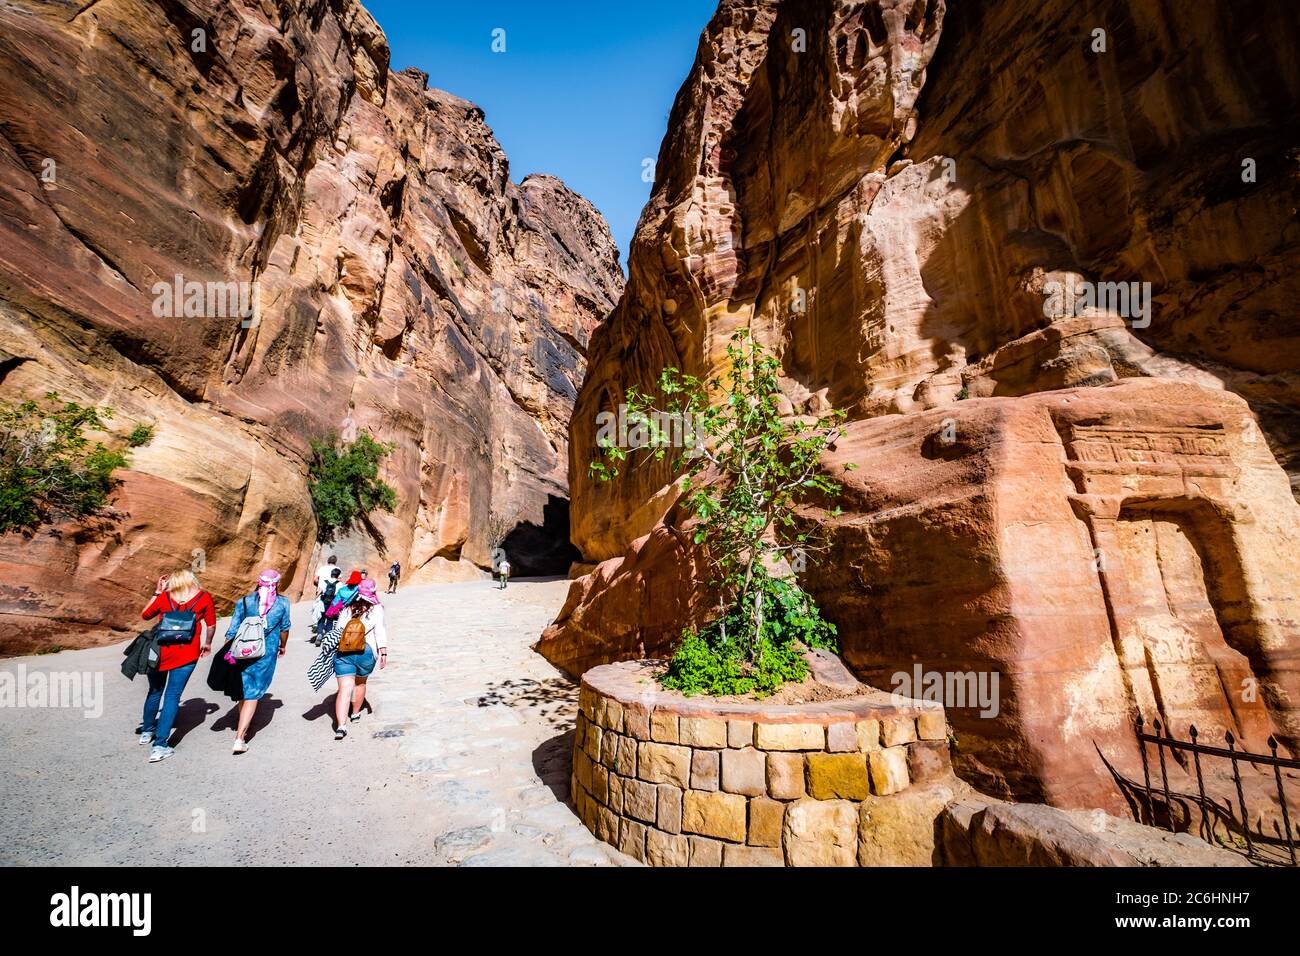 Fresh green scenery on the carved cliff of sandstone rock in Petra, Jordan Stock Photo